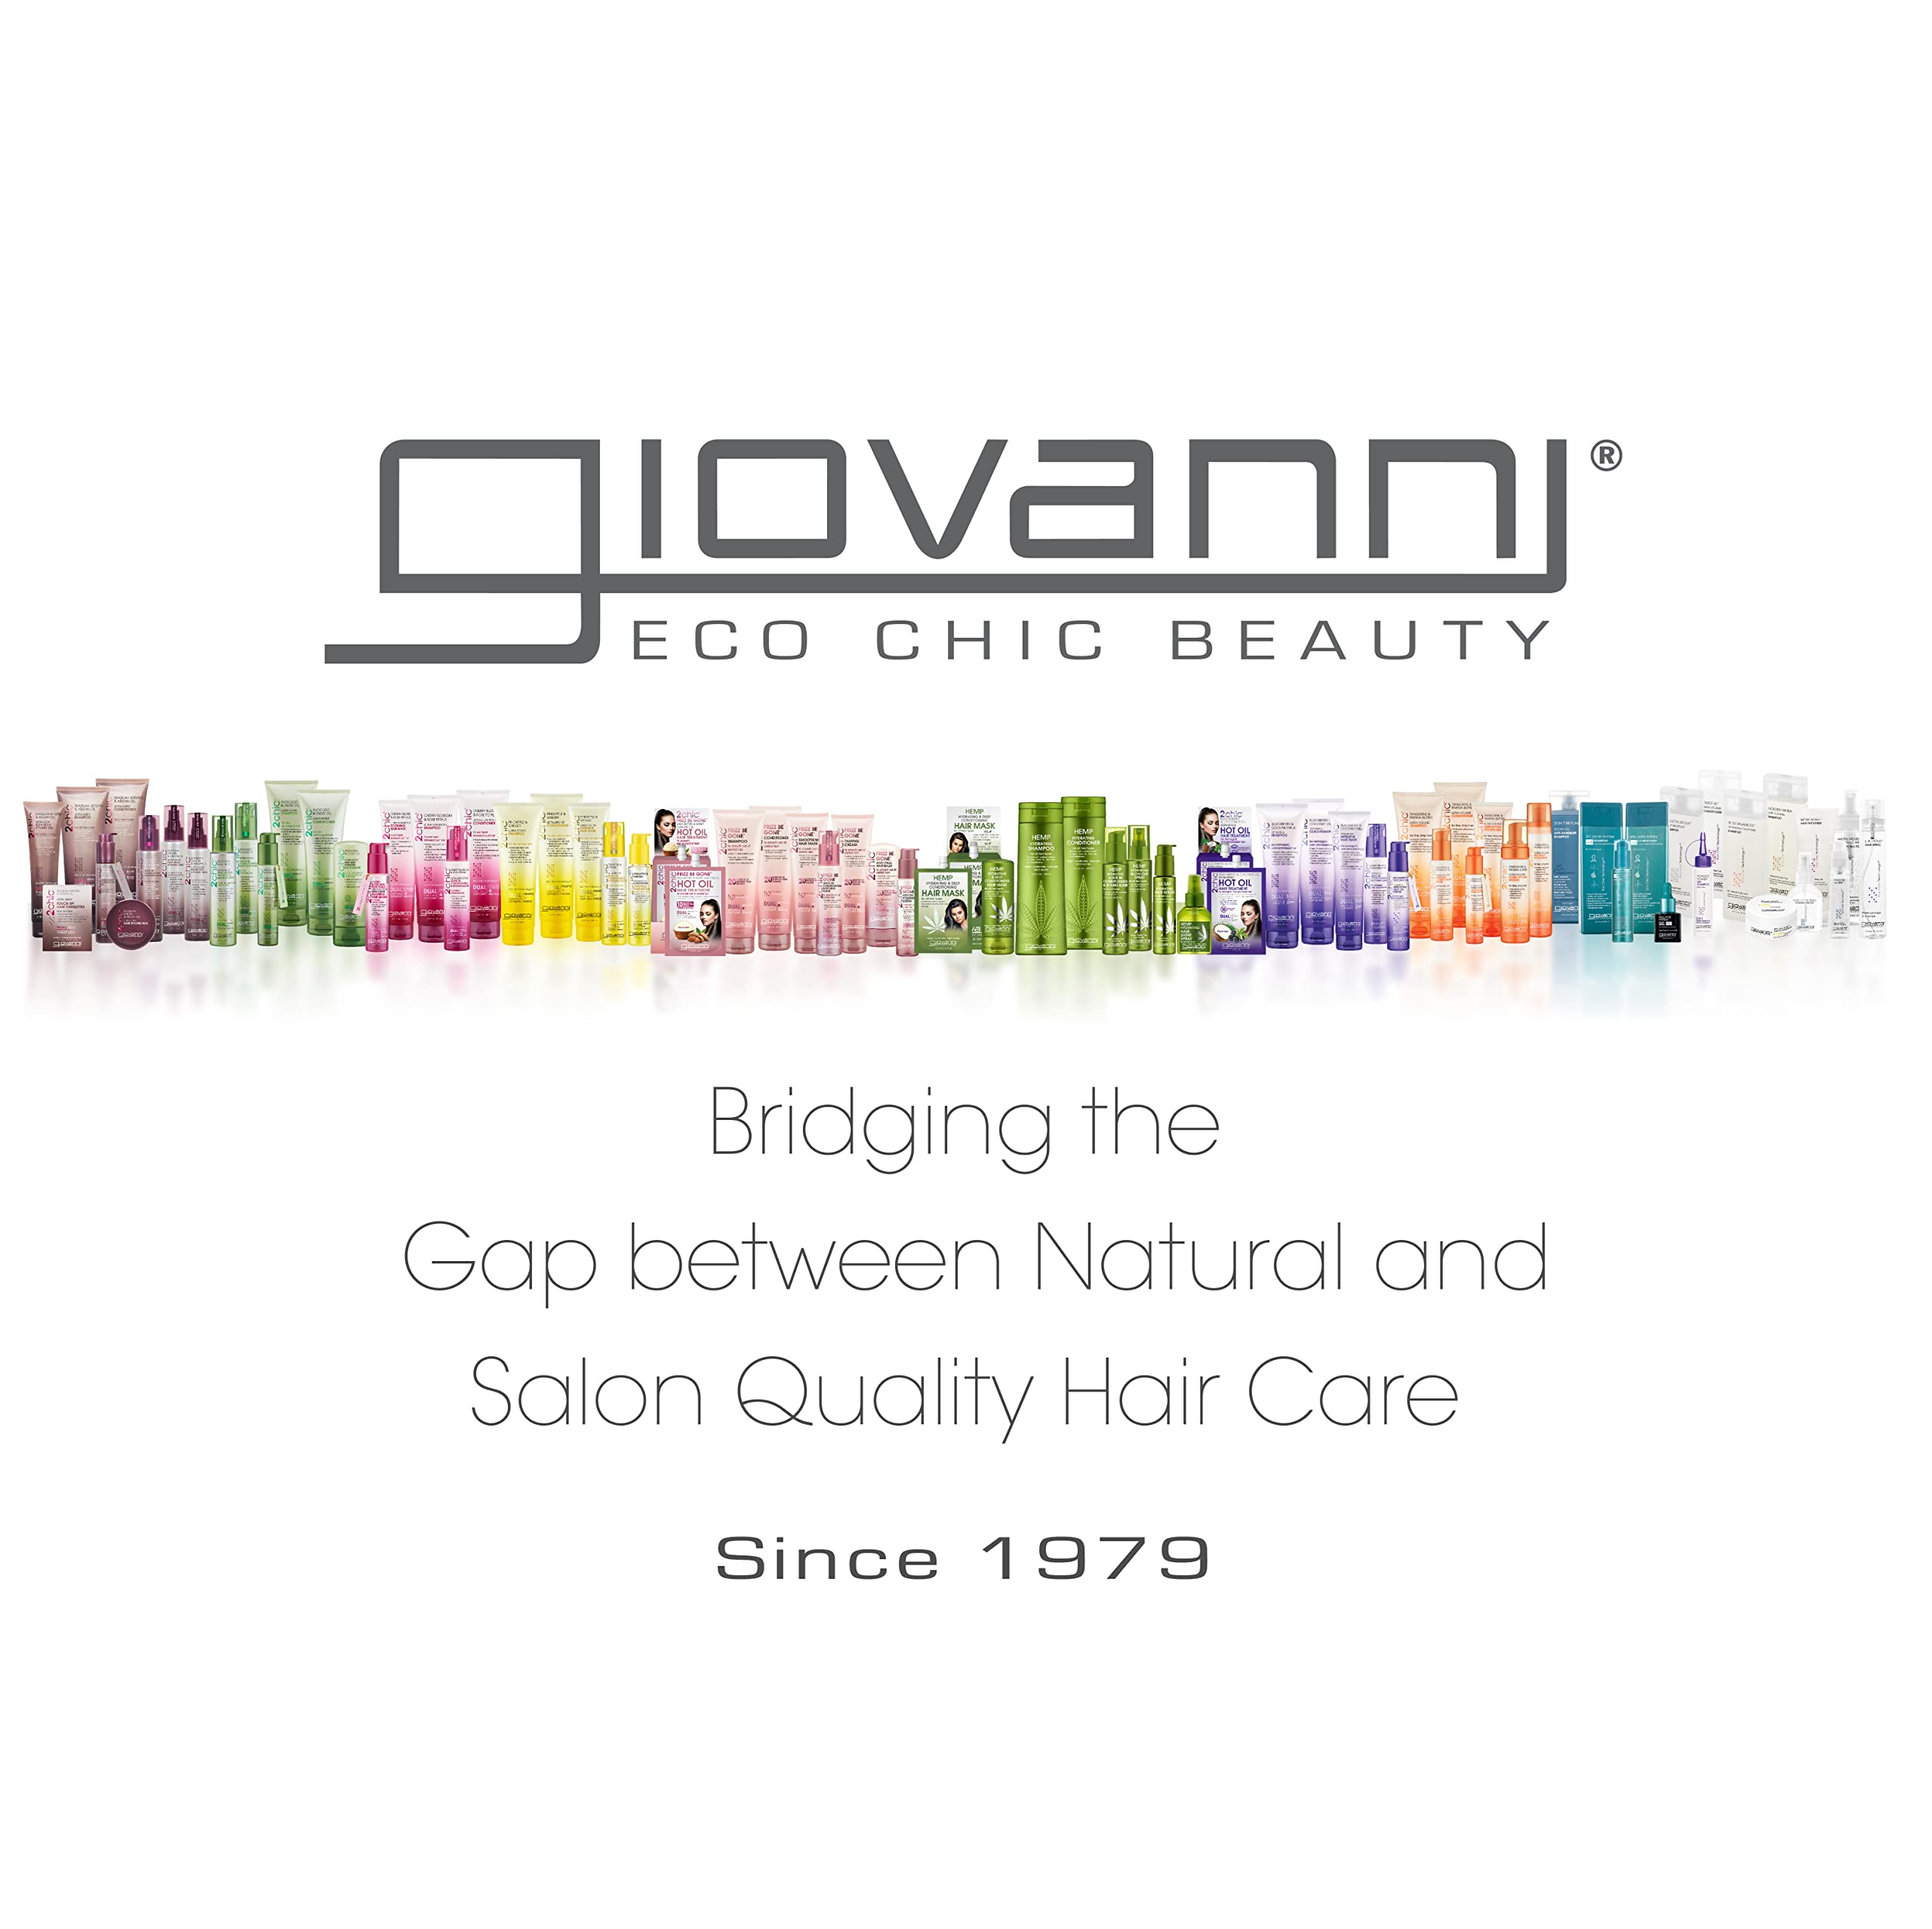 GIOVANNI ECO CHIC 50:50 Balanced Hydrating Clarifying Shampoo - Leaves Hair pH Balanced for Over-Processed Hair, Provides Moisture & Protection, Salon Quality, No Parabens, Color Safe - 8.5 oz (3 Pack)